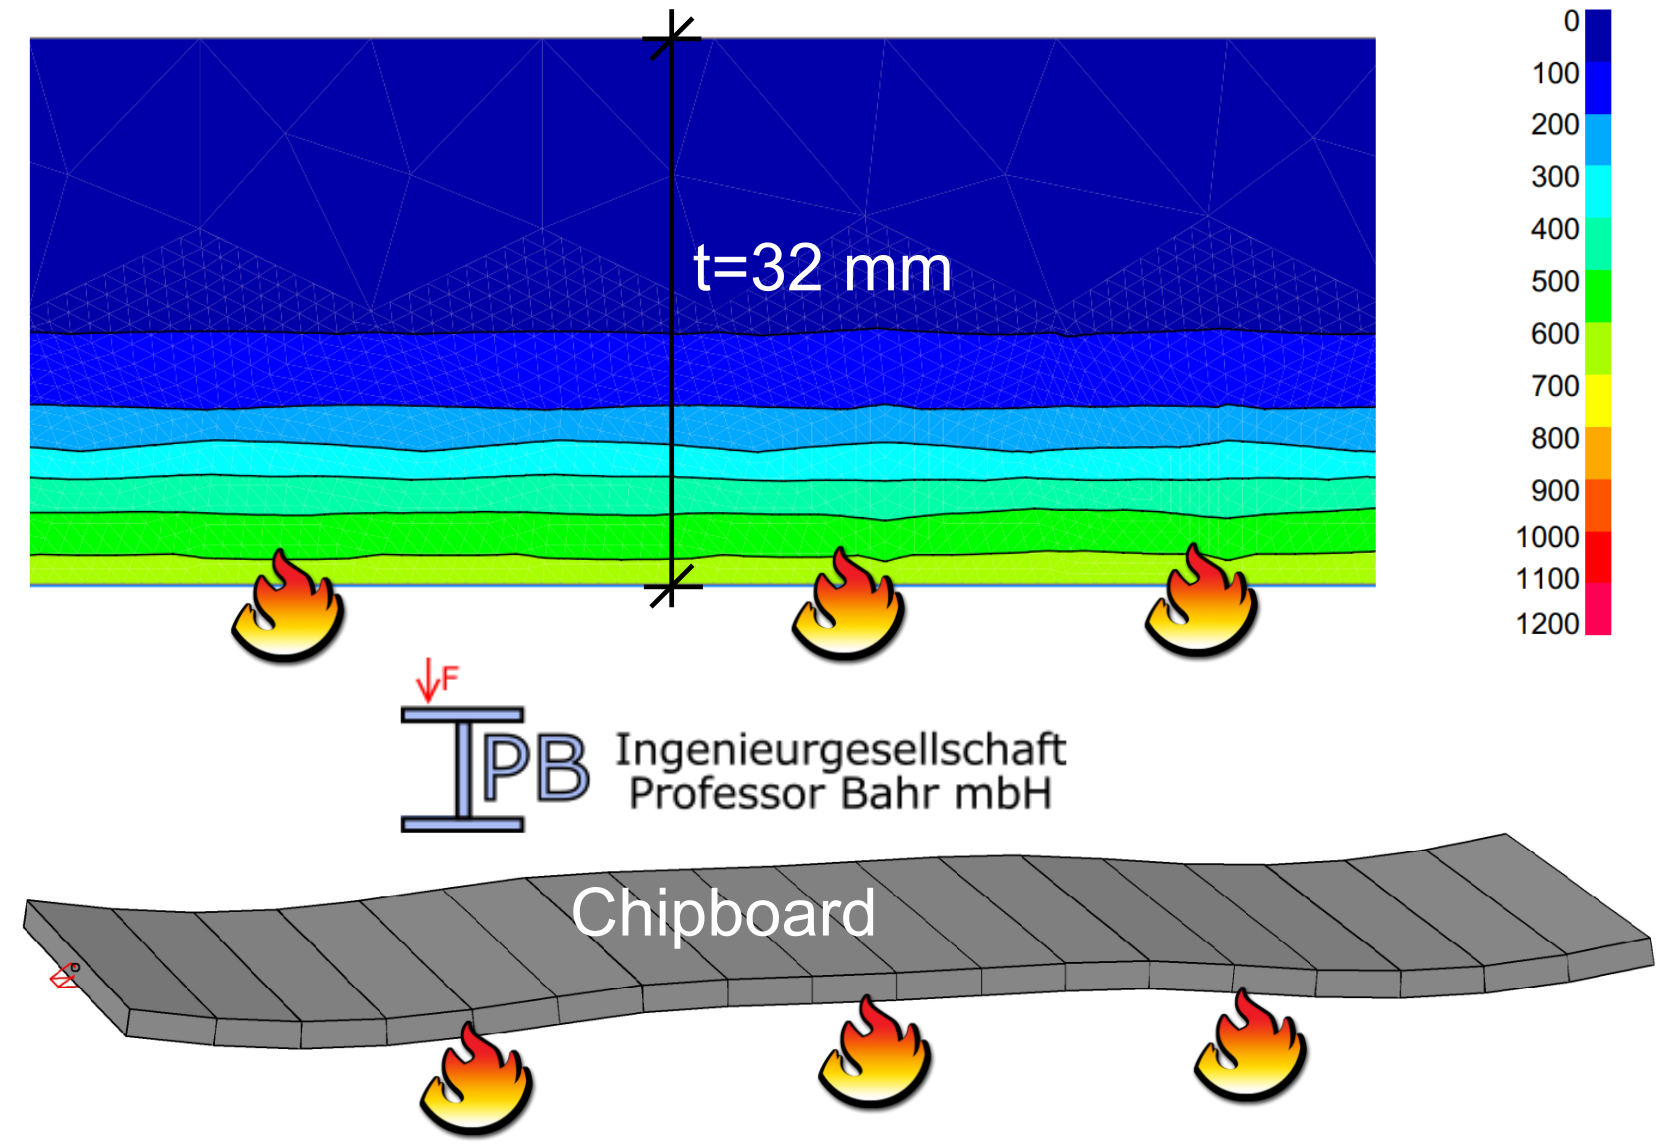 One-sided fire exposure of a chipboard